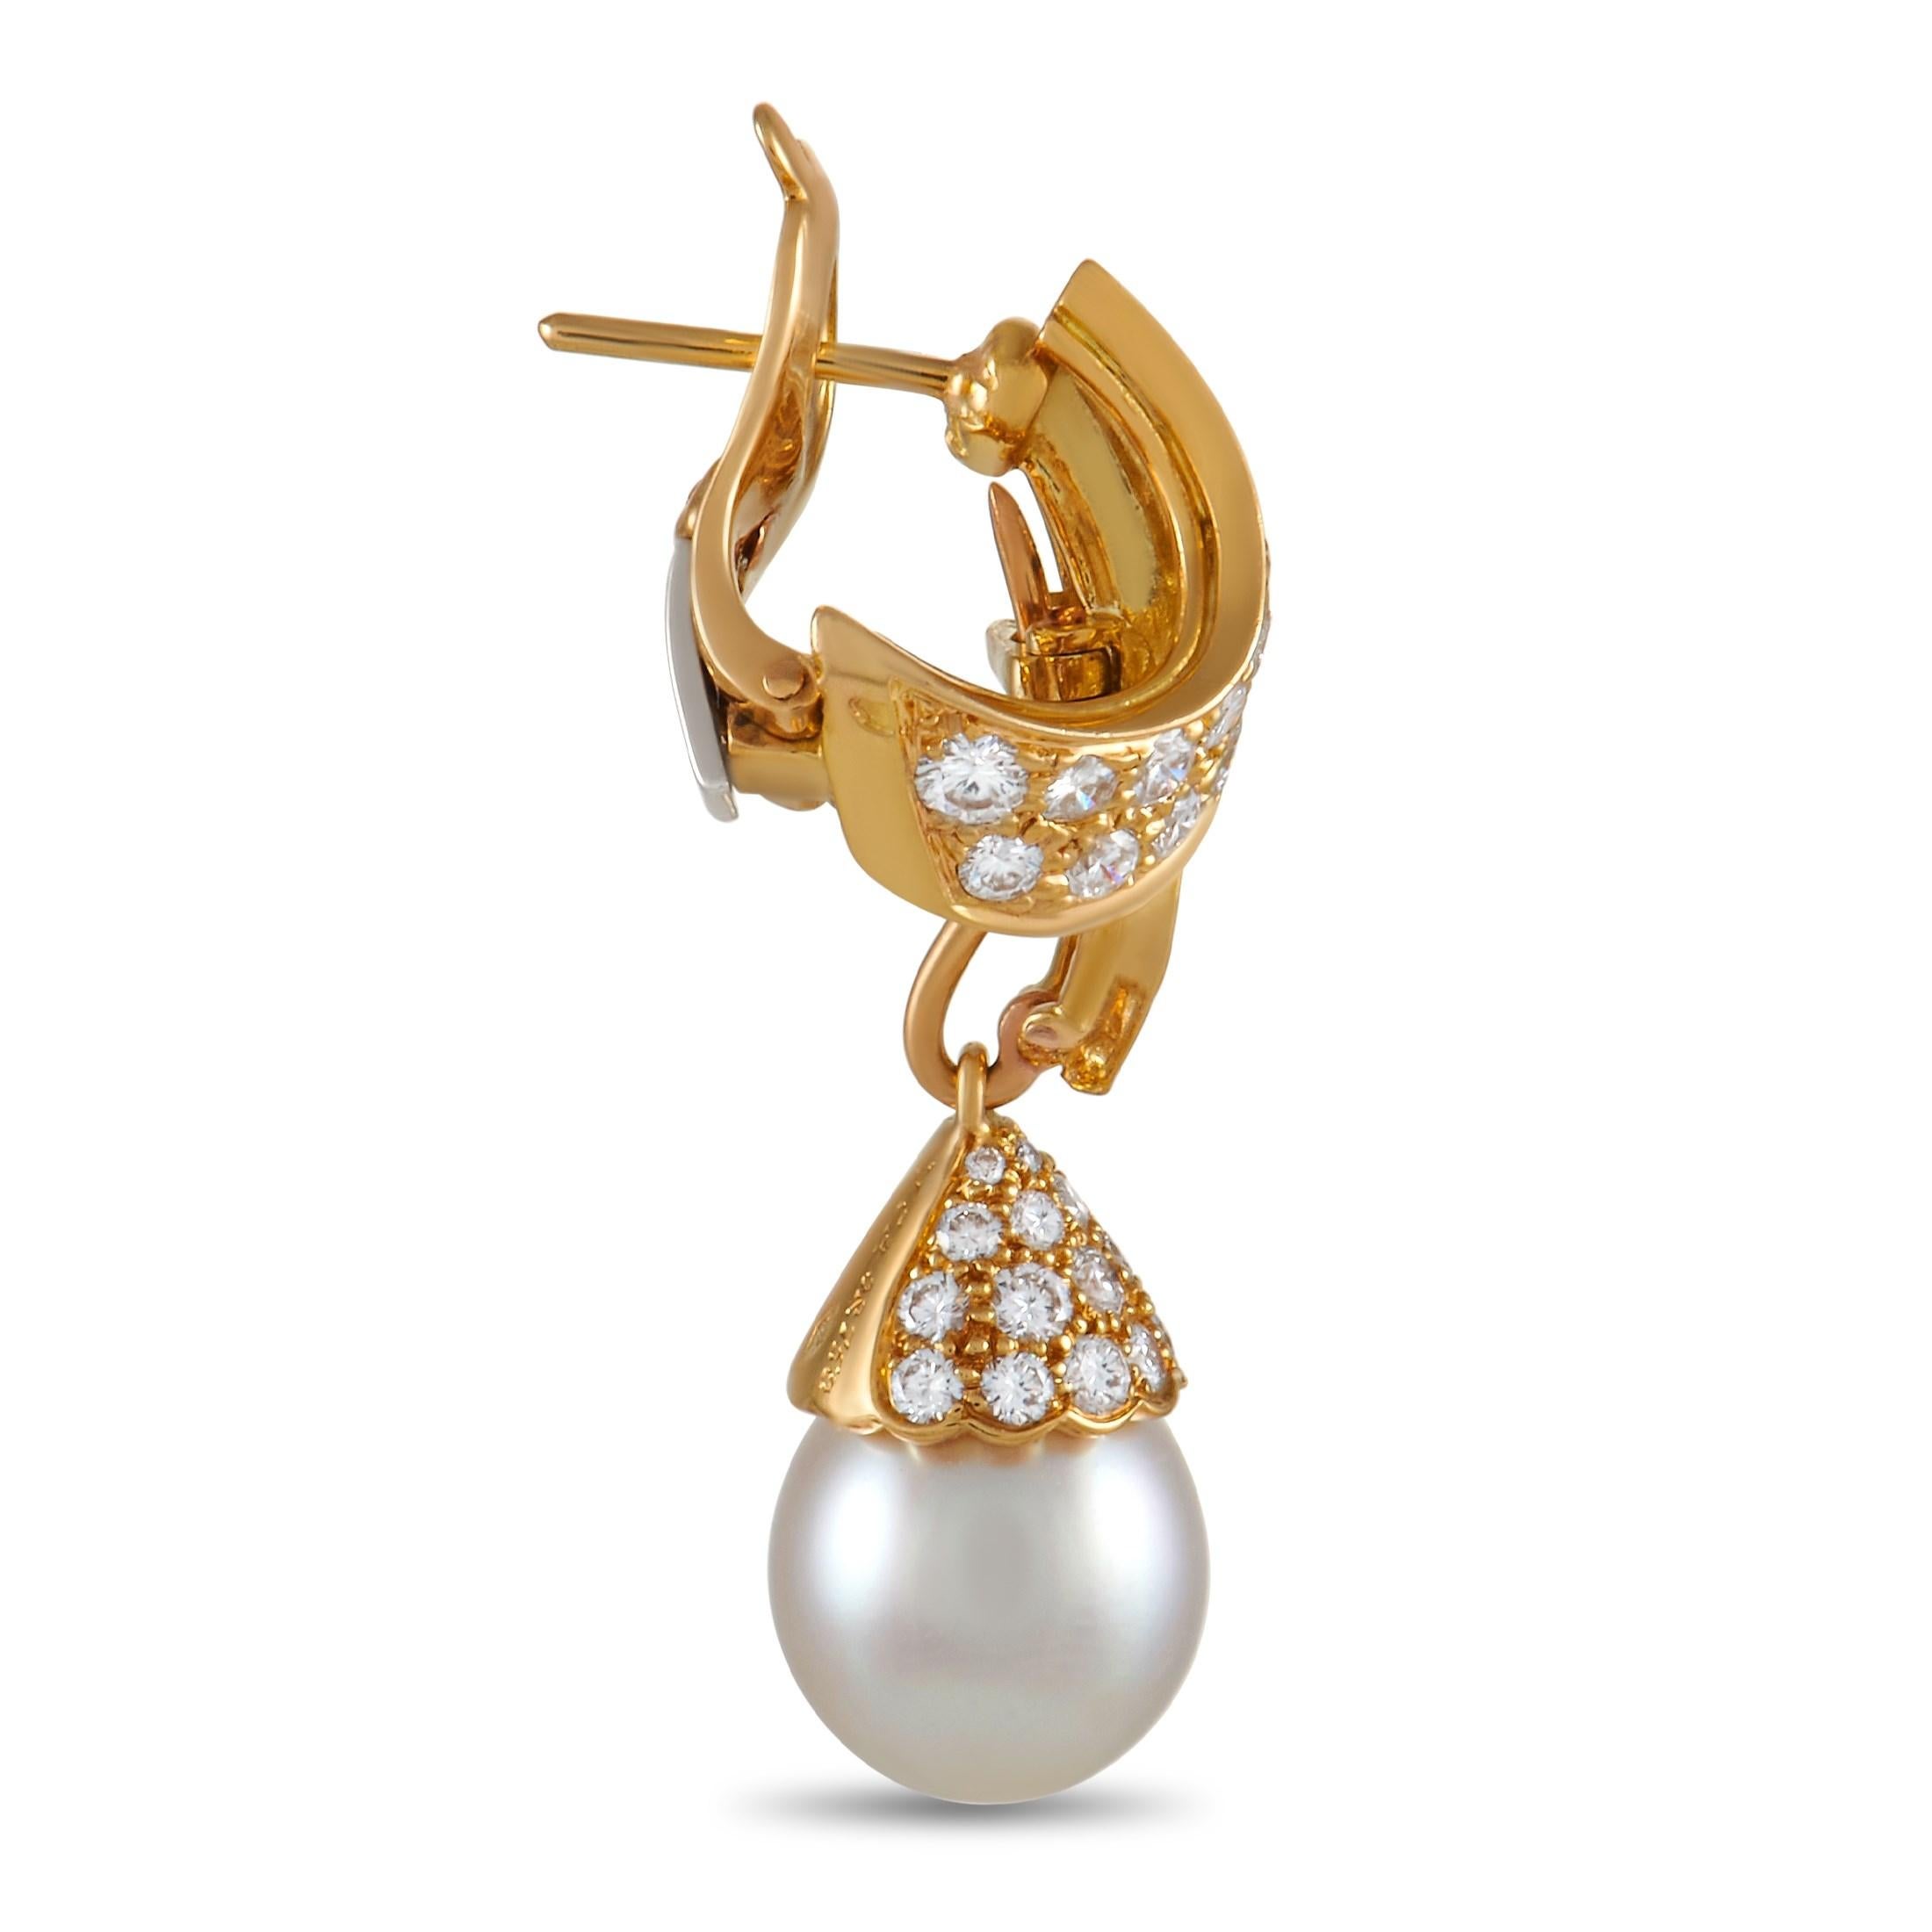 Not to miss is this gorgeous pair of convertible earrings from Van Cleef & Arpels. It features a ribbon motif in yellow gold with two-piece construction. The 9.3mm pearl drop with a diamond-set scalloped cap can be detached from the diamond-set